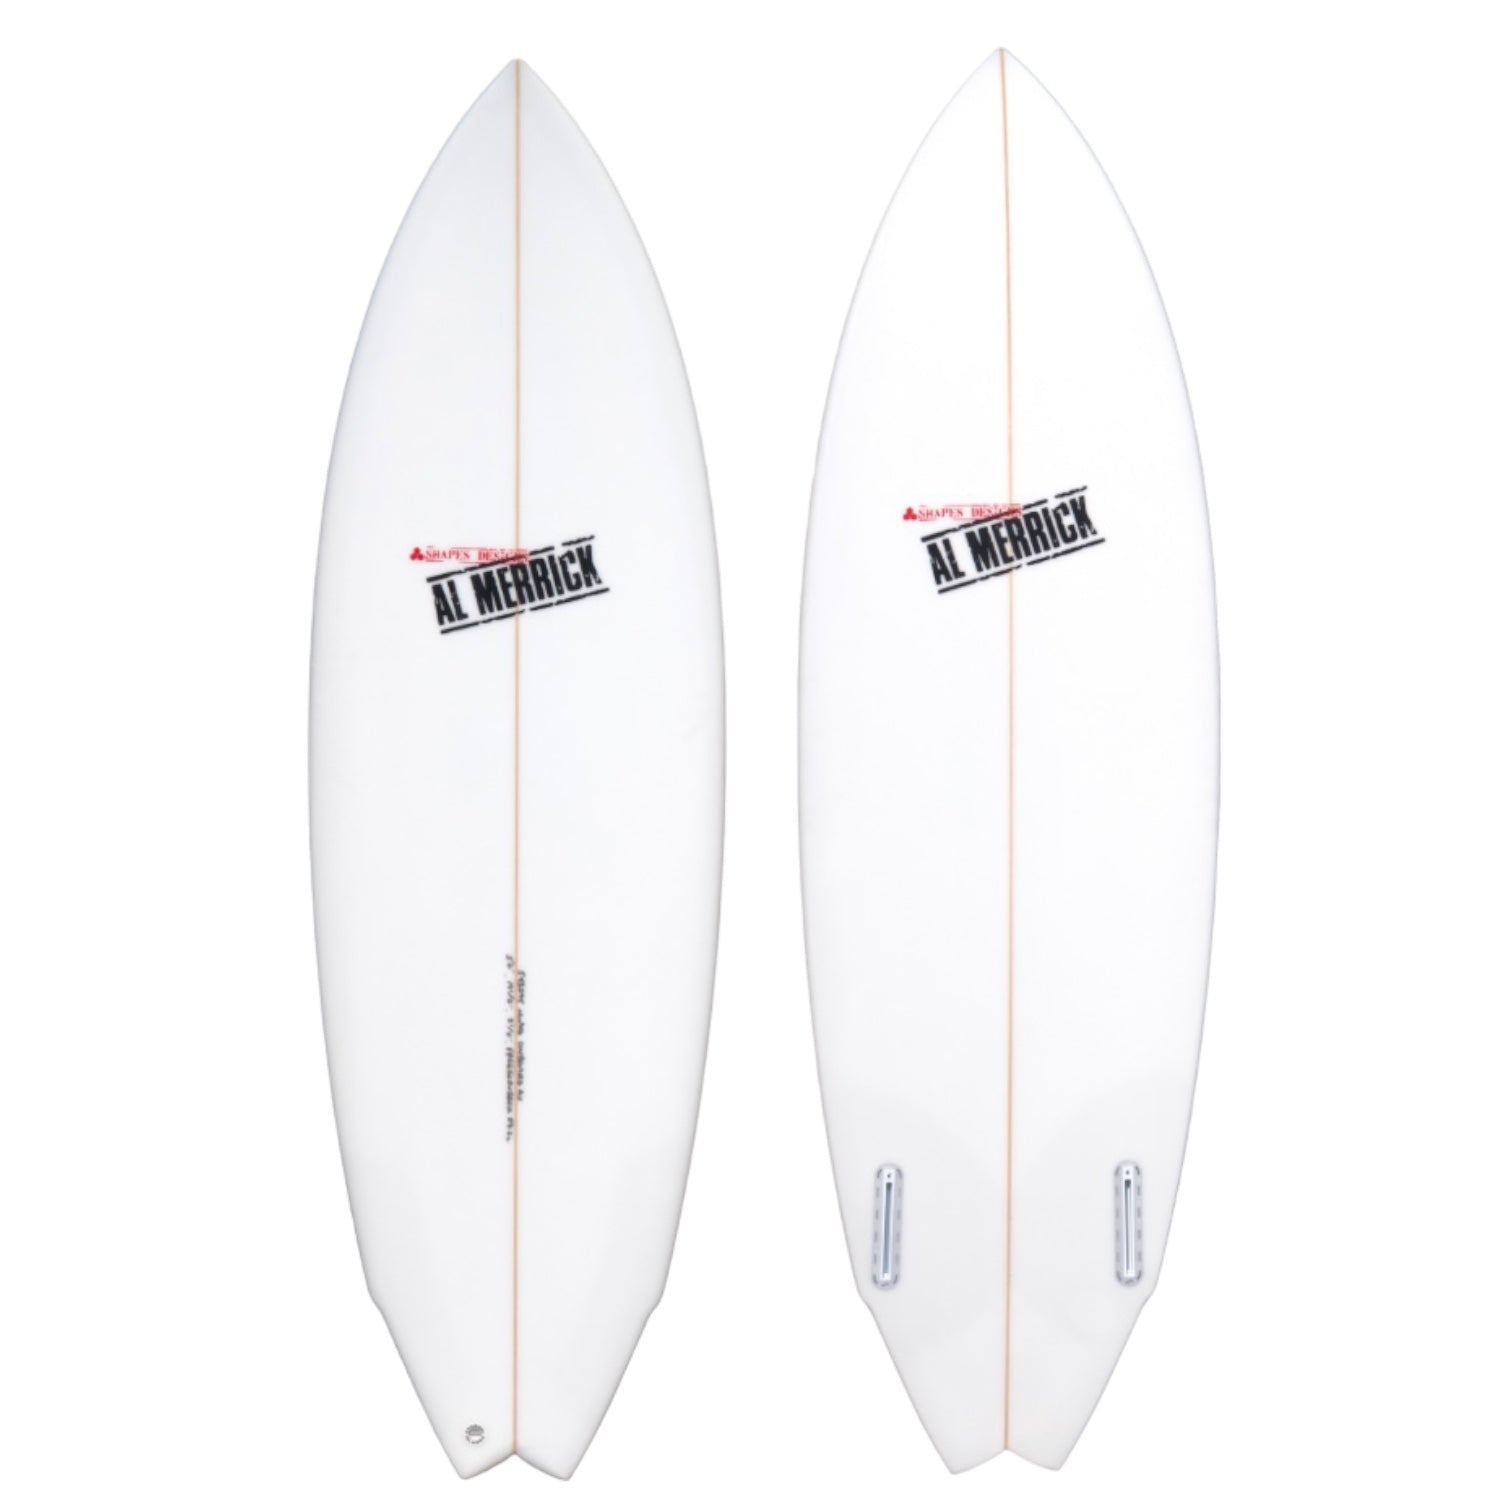 BUY Channel Islands PRO SURFBOARD ONLINE AND INSTORE AT KISS SURF